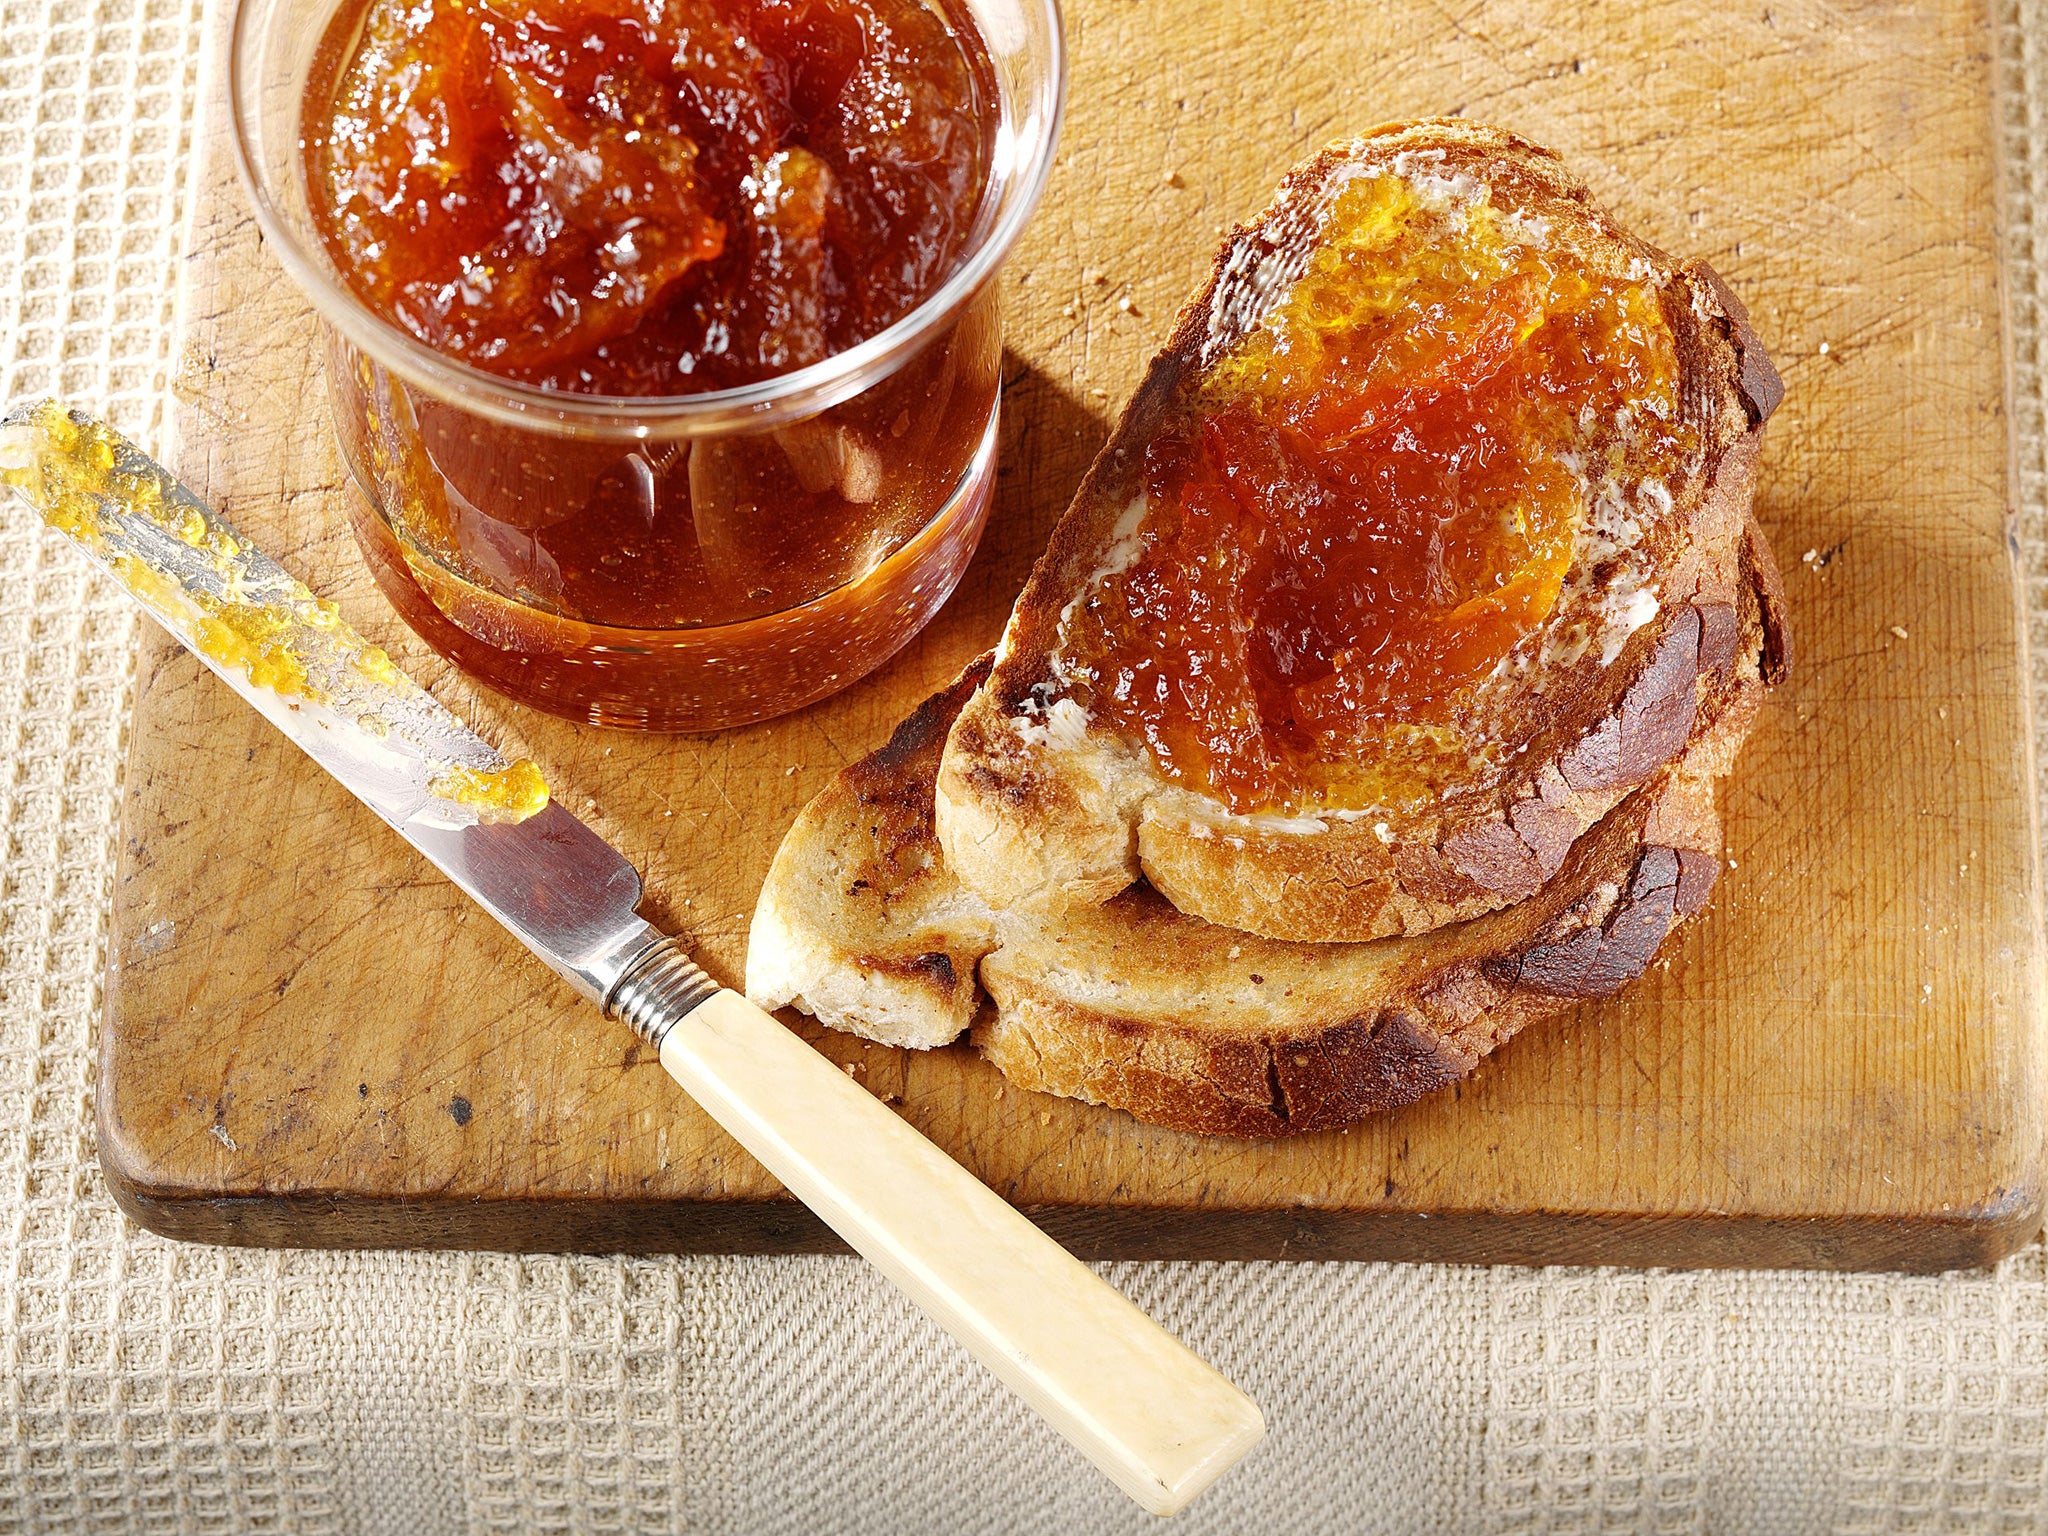 Ministers intend to relax regulations governing the minimum level of sugar which a product calling itself jam or marmalade can contain